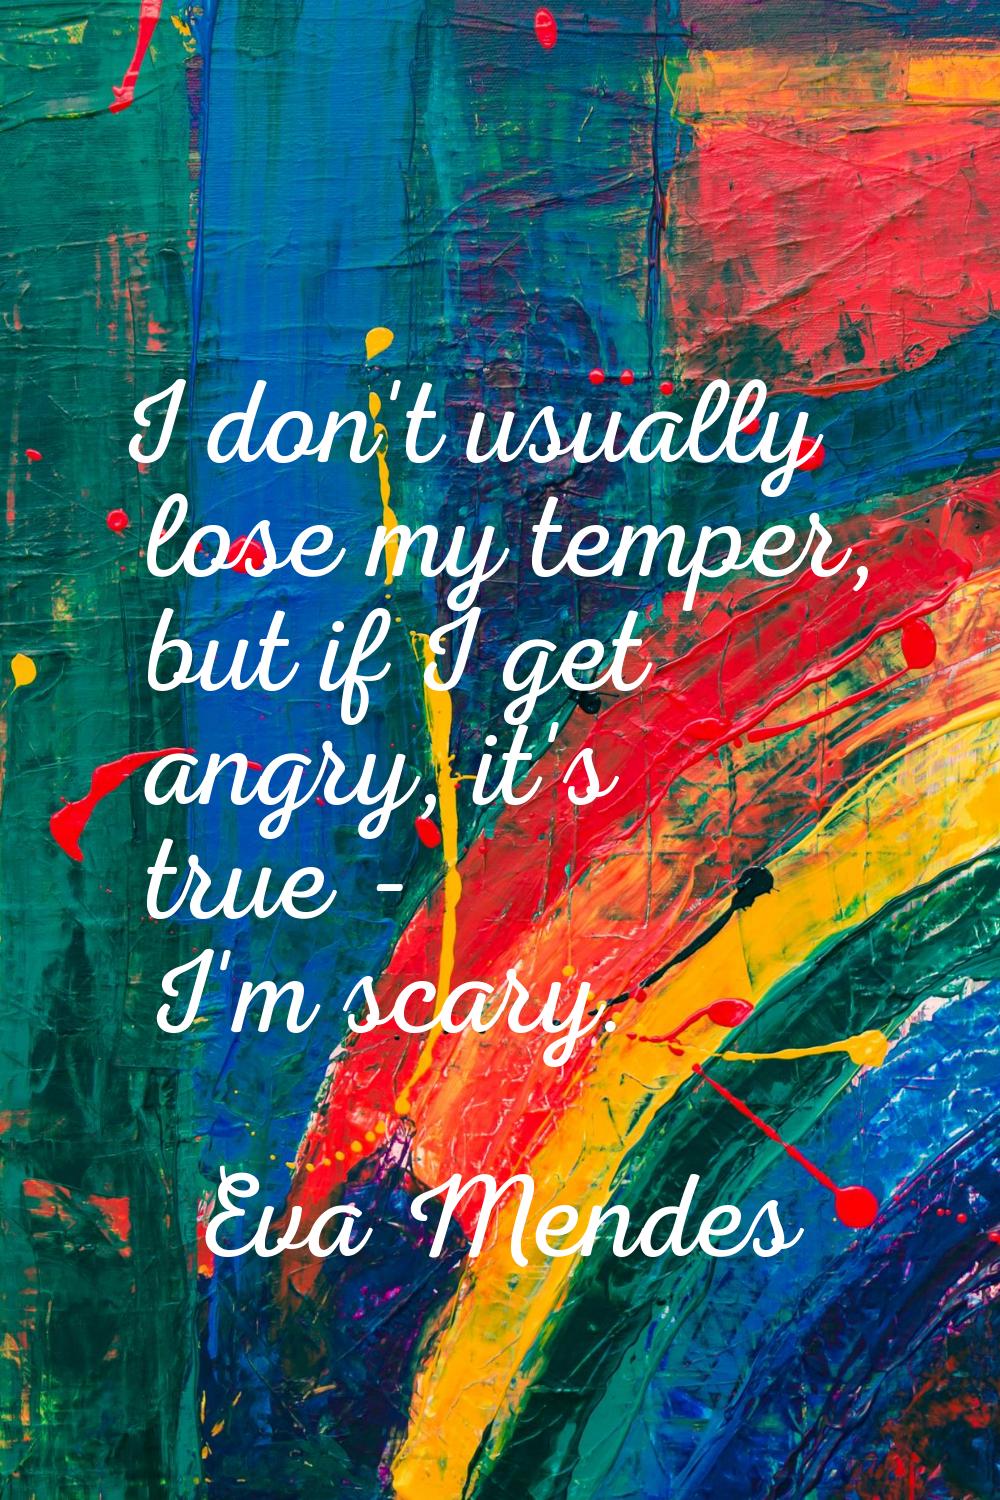 I don't usually lose my temper, but if I get angry, it's true - I'm scary.